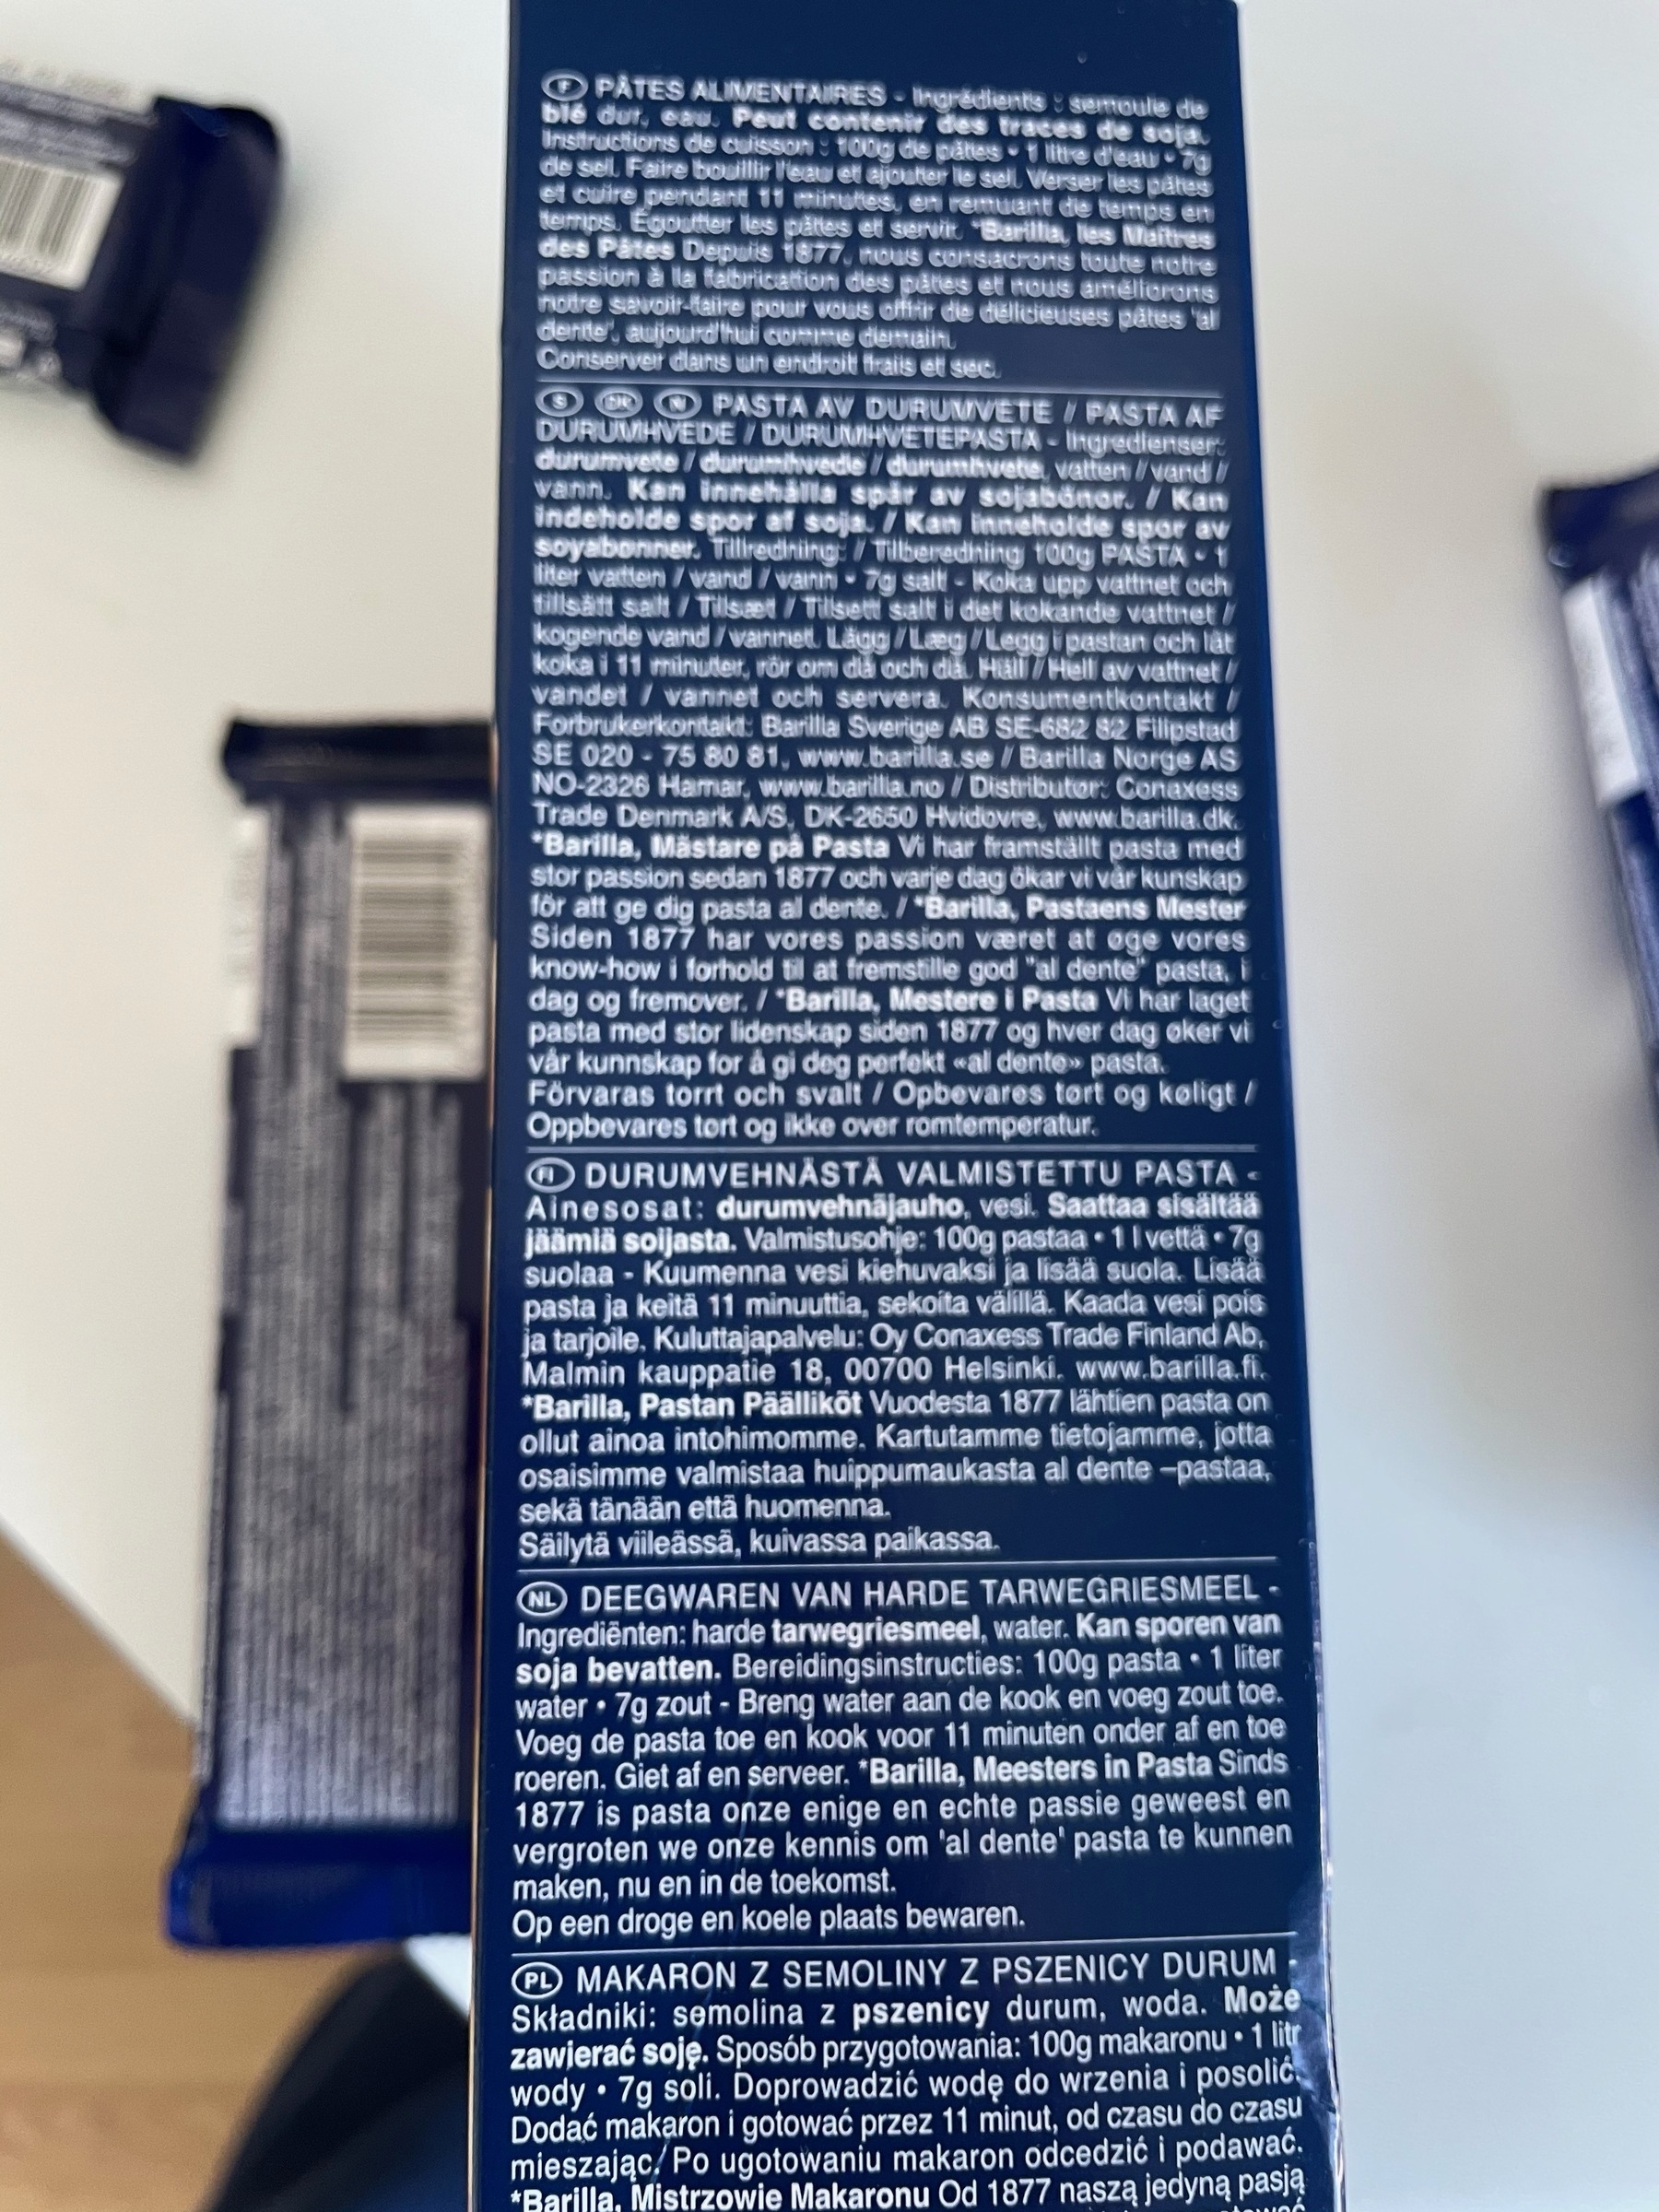 product package with ingredients listed in Polish, Finnish, Norwegian, Swedish and English” /></p>

<p>(7 grams of salt!)</p>

<h2 id=